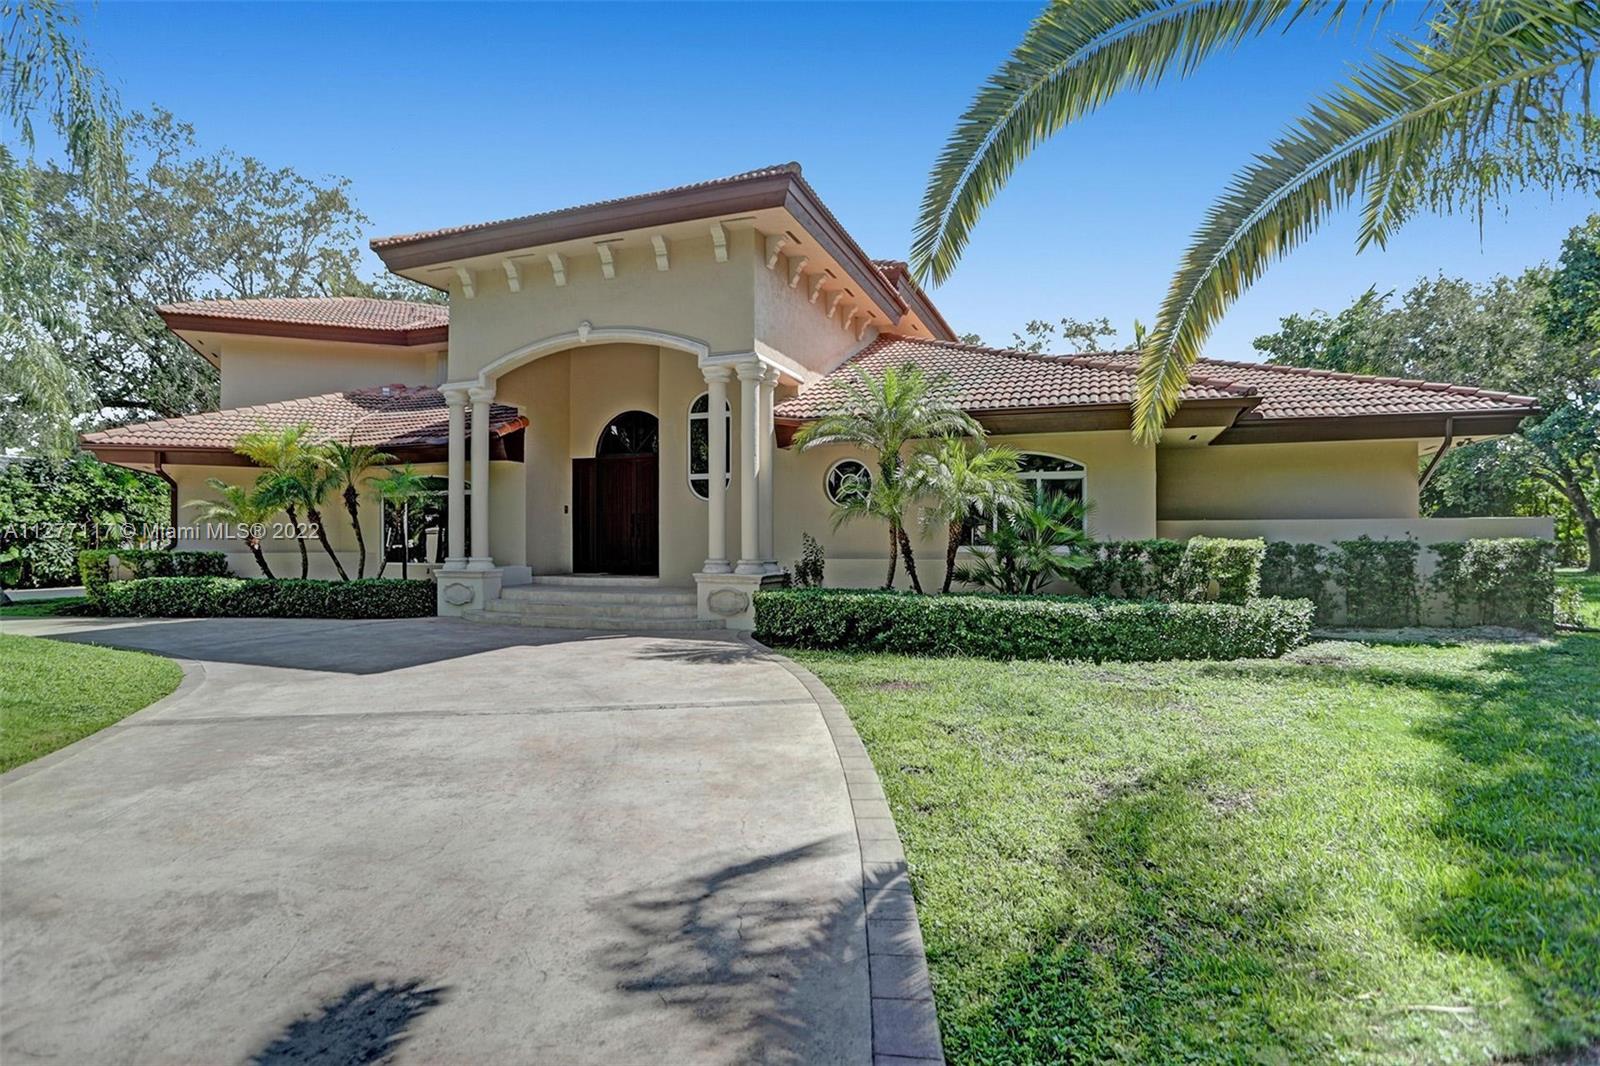 Welcome to this secluded split level home in prestigious N Pinecrest. 6BR, 5B 3 car garage on an almost acr lot! Spacious foyer leads to a dramatic 2-stry open living rm w/high vol ceilings & marble flrs. Ease along to the formal dining rm w/beautiful garden view. The gourmet kitchen features an island w/wood cabinetry, granite countertops, sub zero refrigerator/stainless appliances. The open concept breakfast nook flows into generously spaced-family rm w/pool view & tropical landscaped backyard. A lg primary suite sits on the 2nd flr w/walk-in closet & marble bath w/soaking tub. Walk on to covered terrace that overlooks the pool & tropical oasis below. There are additional 4/BR 3B on the 1st flr for family & guests. Property is walled-gated  for security and privacy.